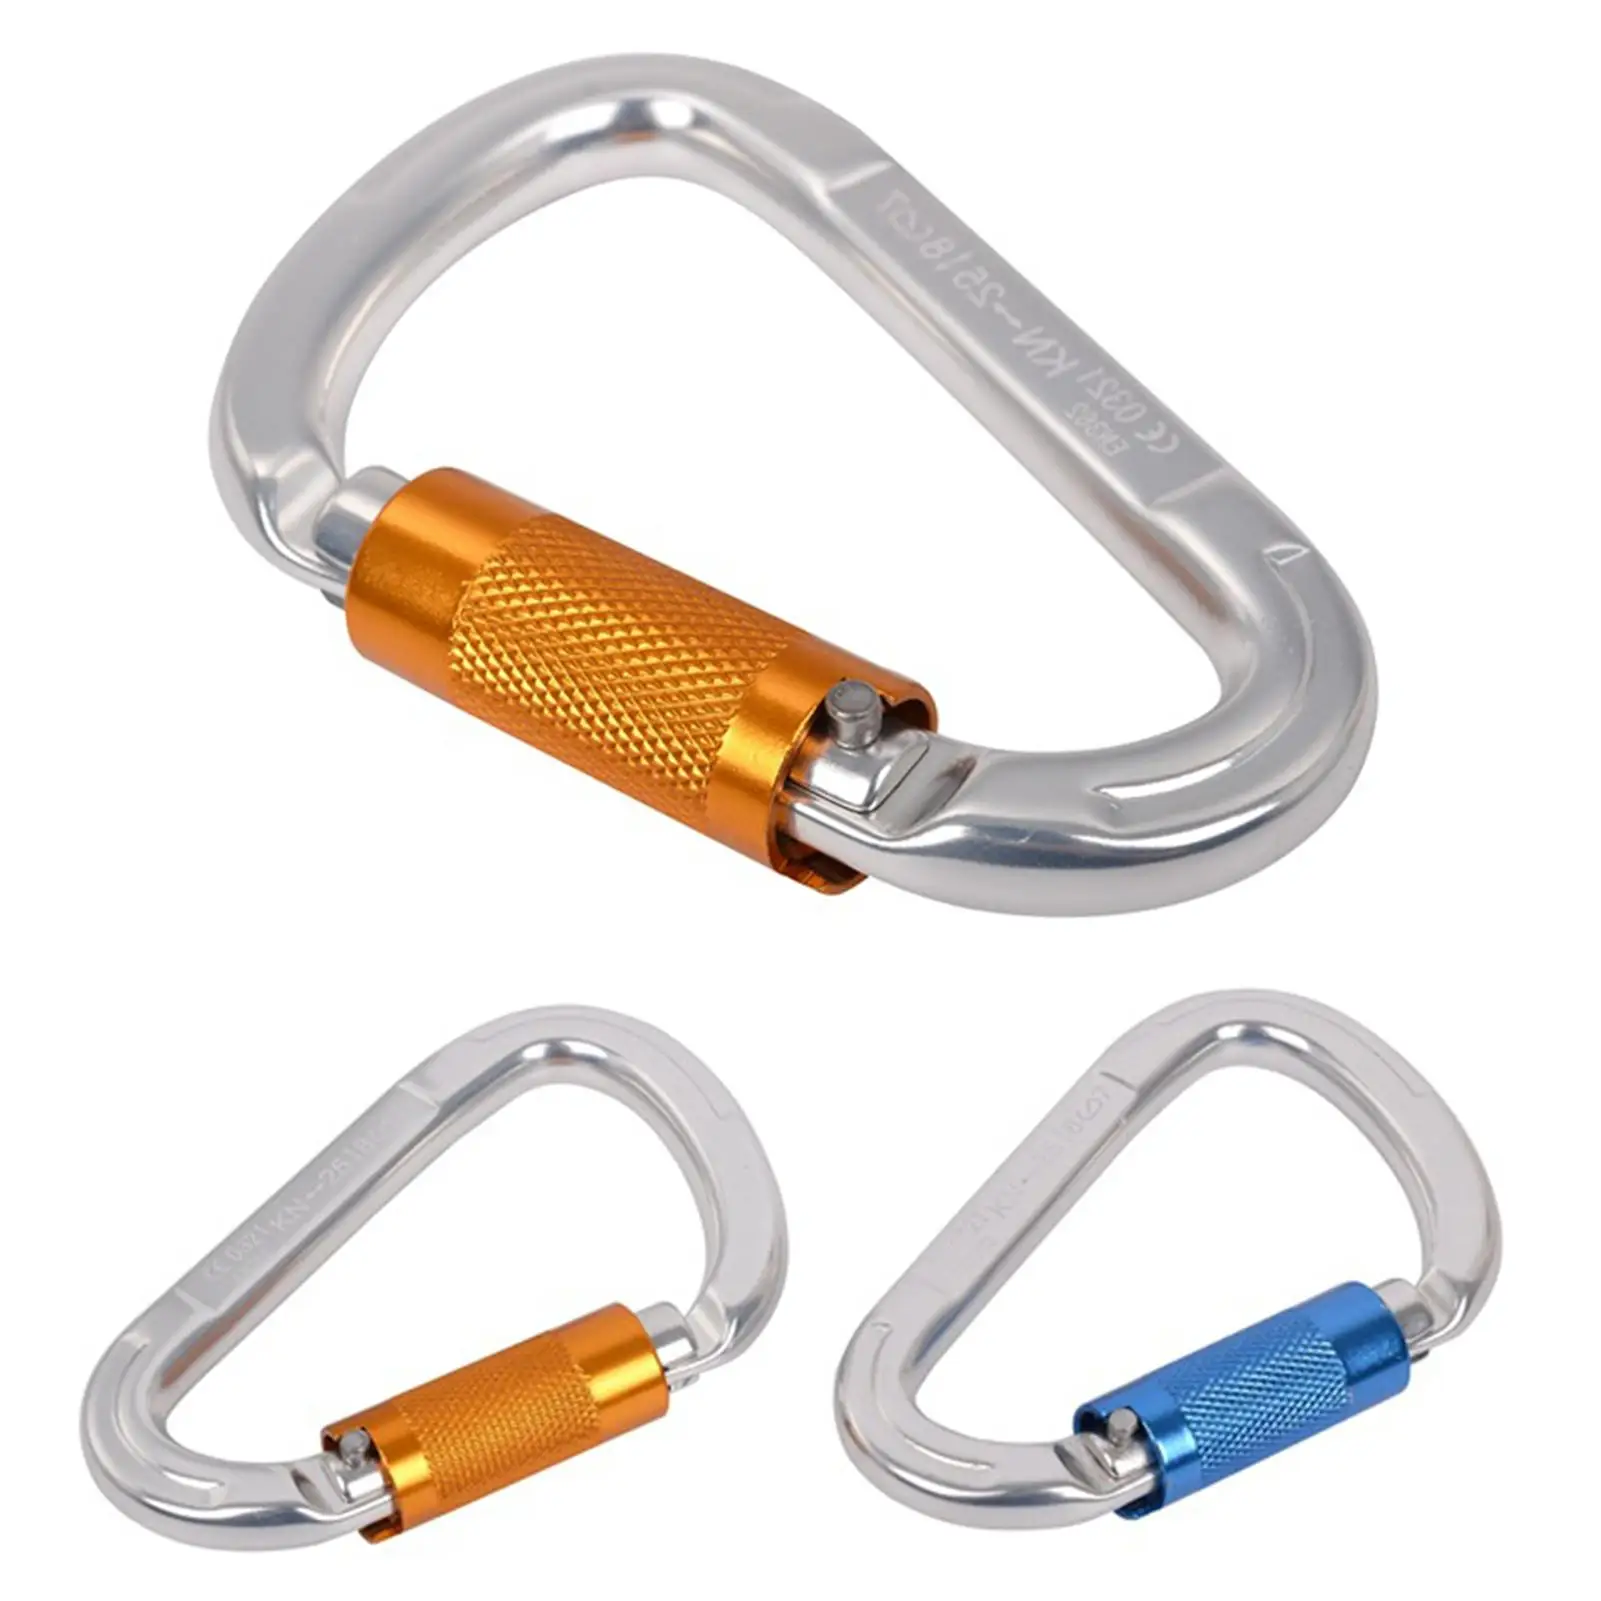 

Rock Climbing Auto Locking Clip 25KN Heavy Duty Mountaineering Carabiner for Rappelling Rescue D Shaped Safety Screw Lock Buckle